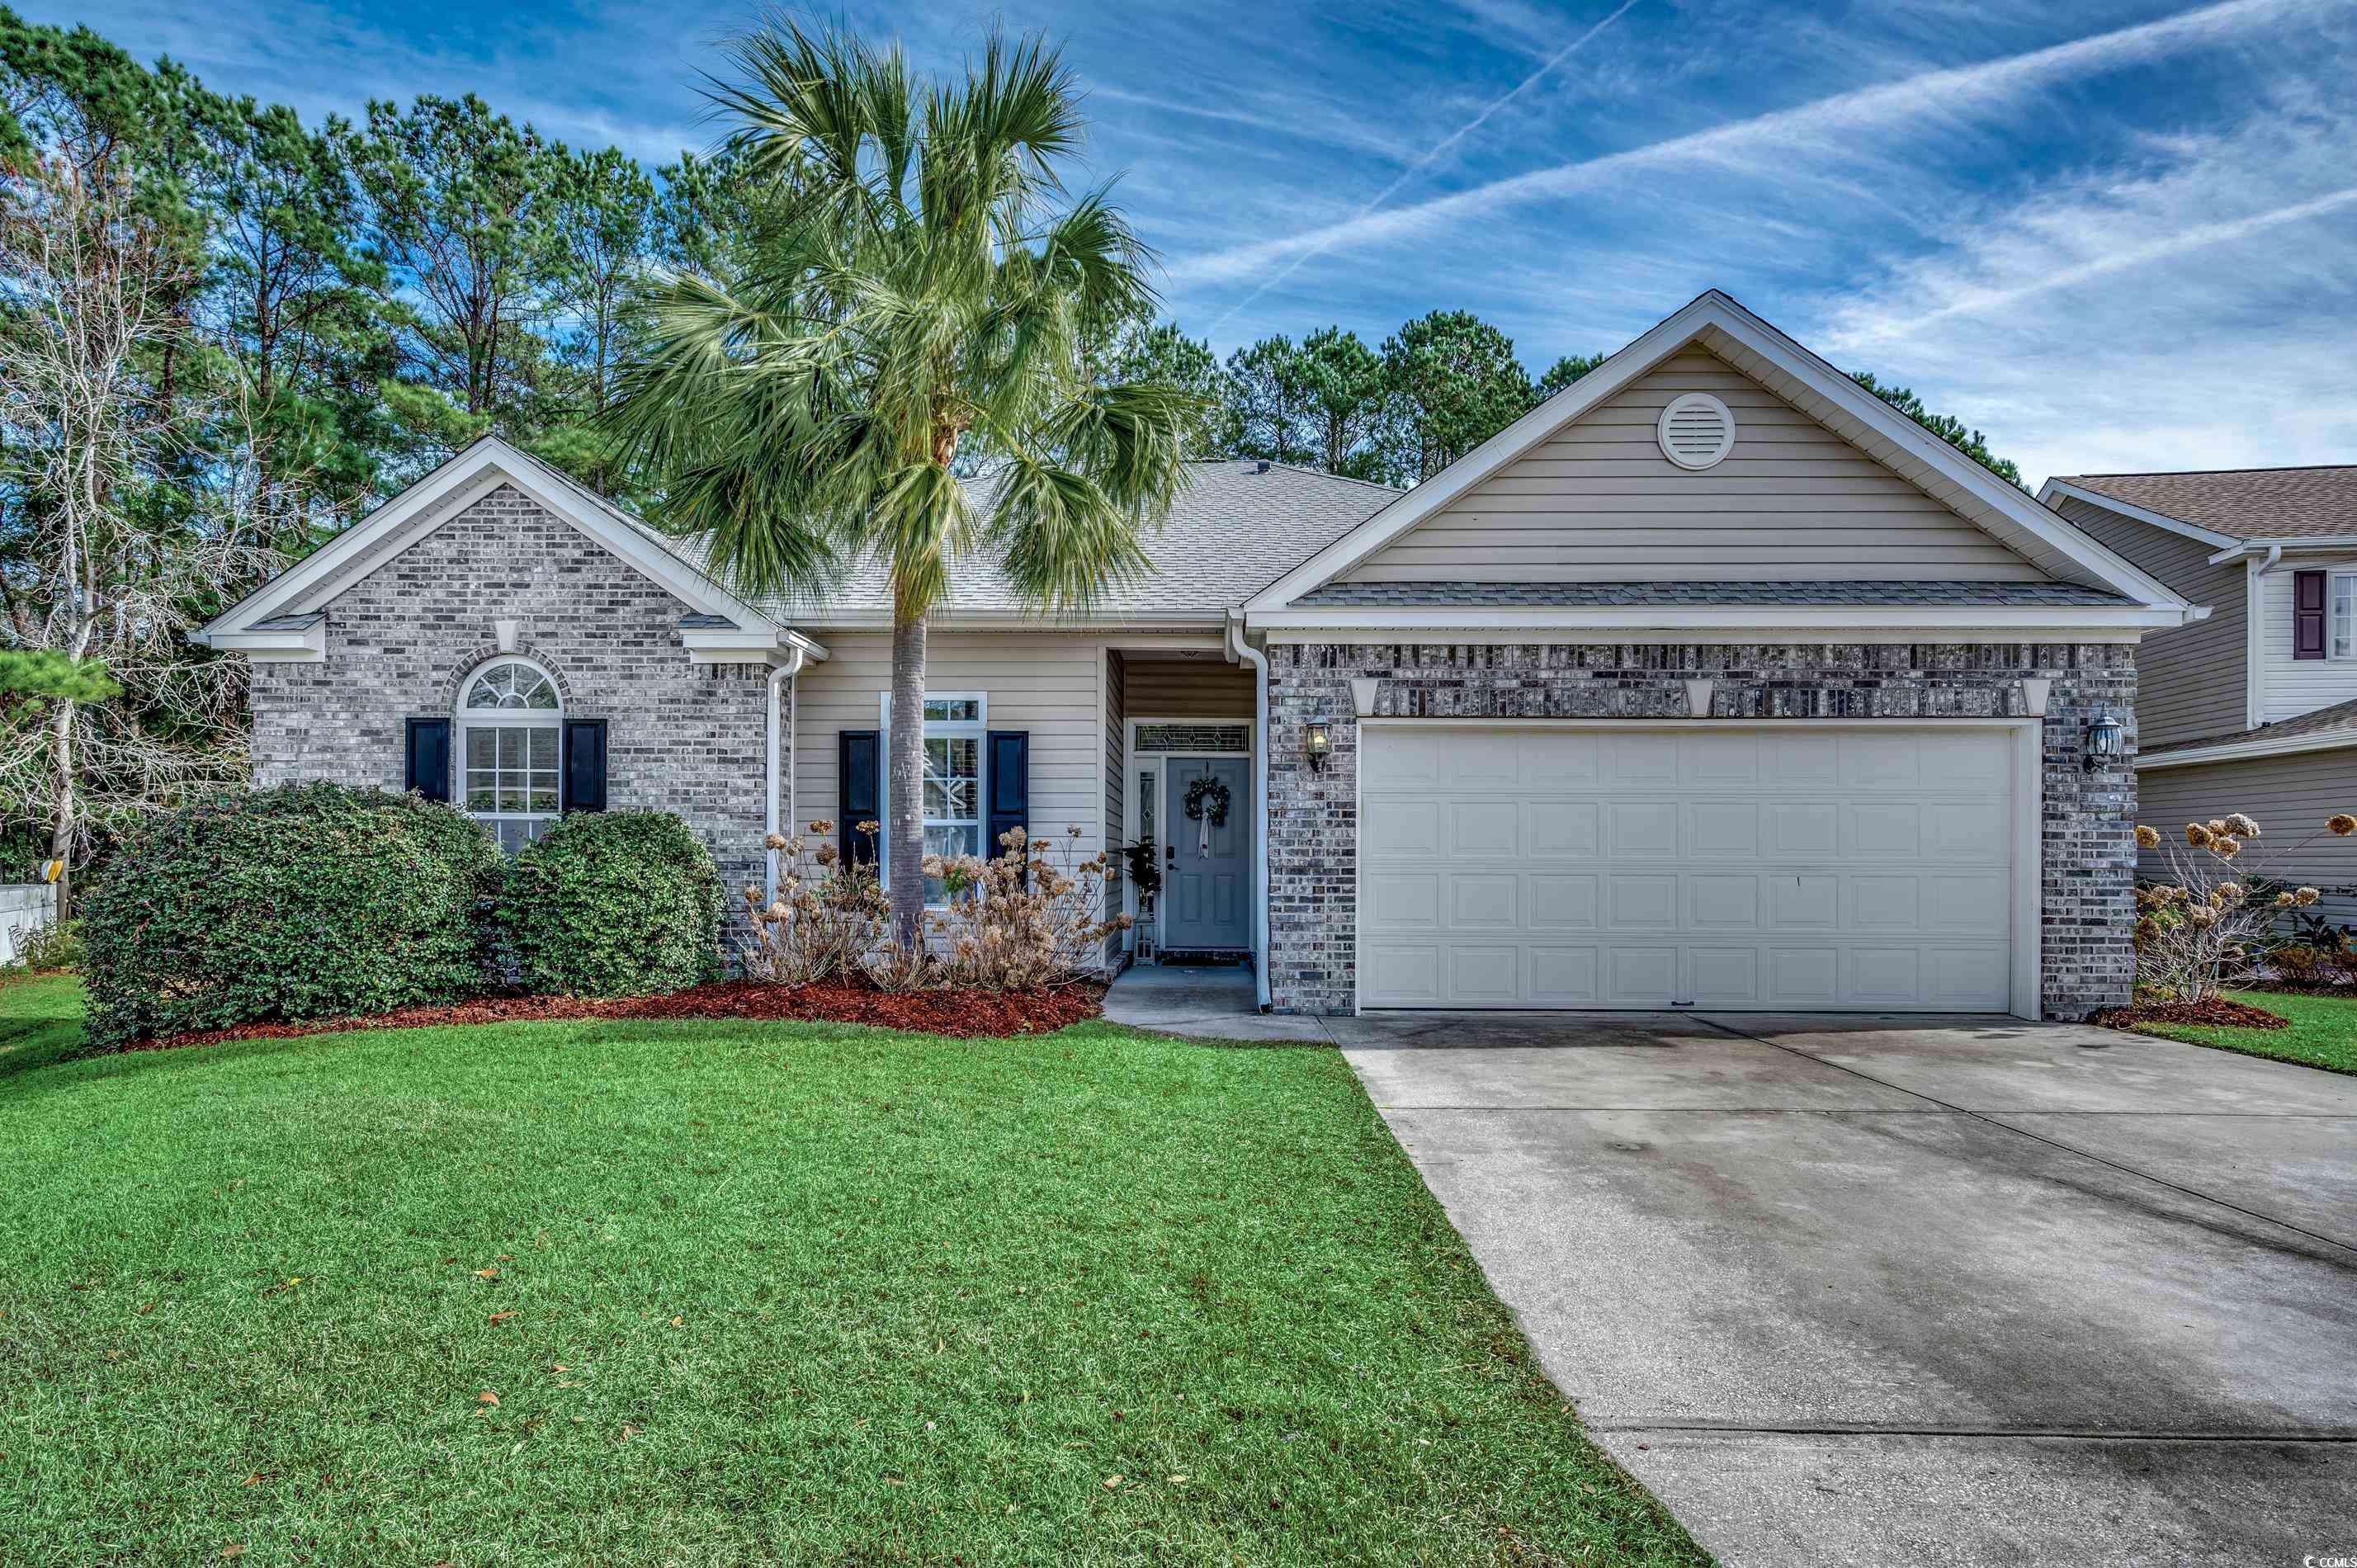 52 Easter Lilly Ct. Murrells Inlet, SC 29576